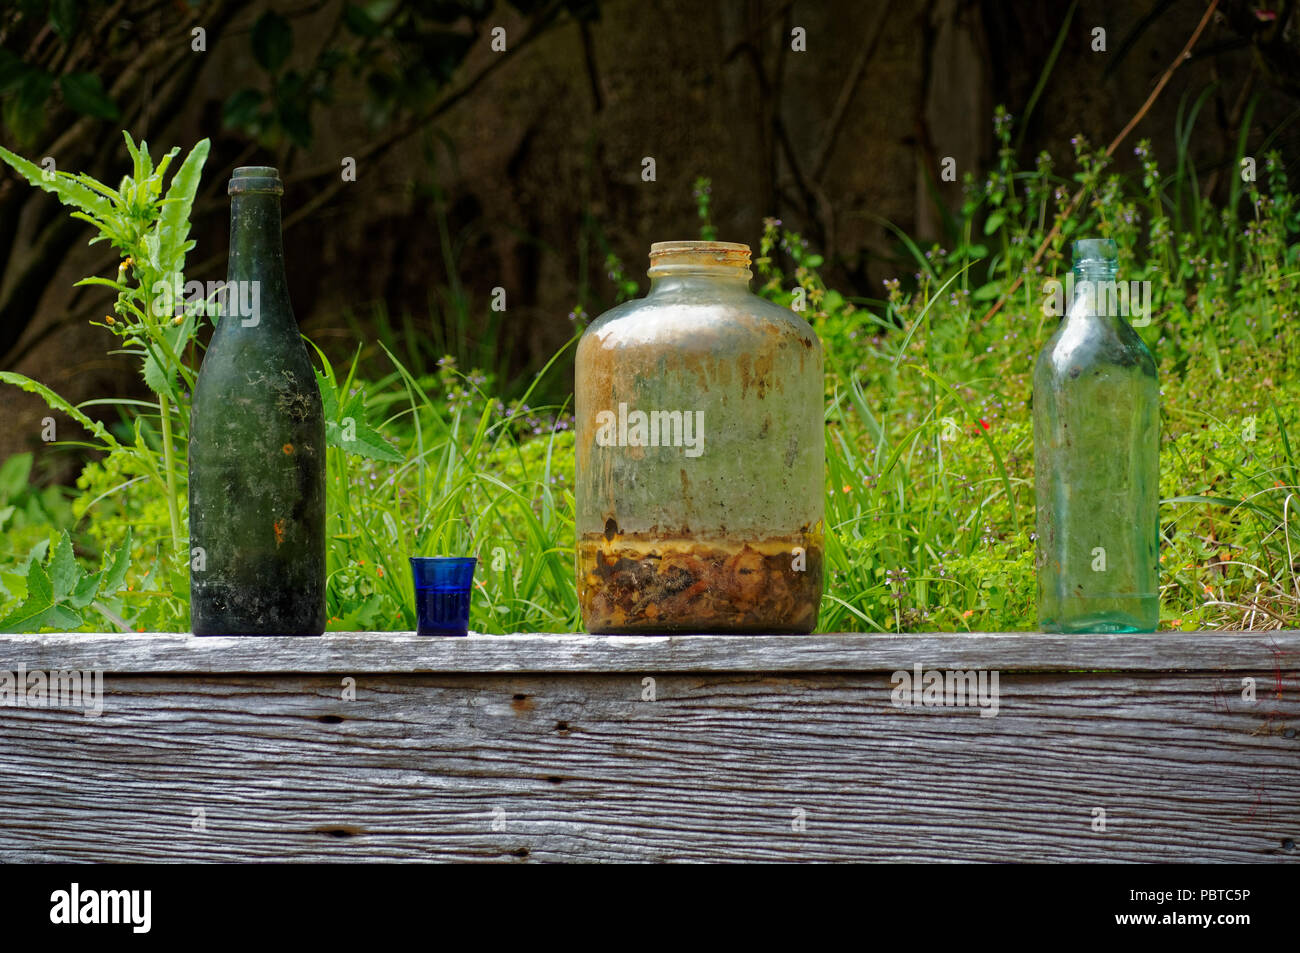 Old bottles and jars discarded on a wooden garden fence Stock Photo